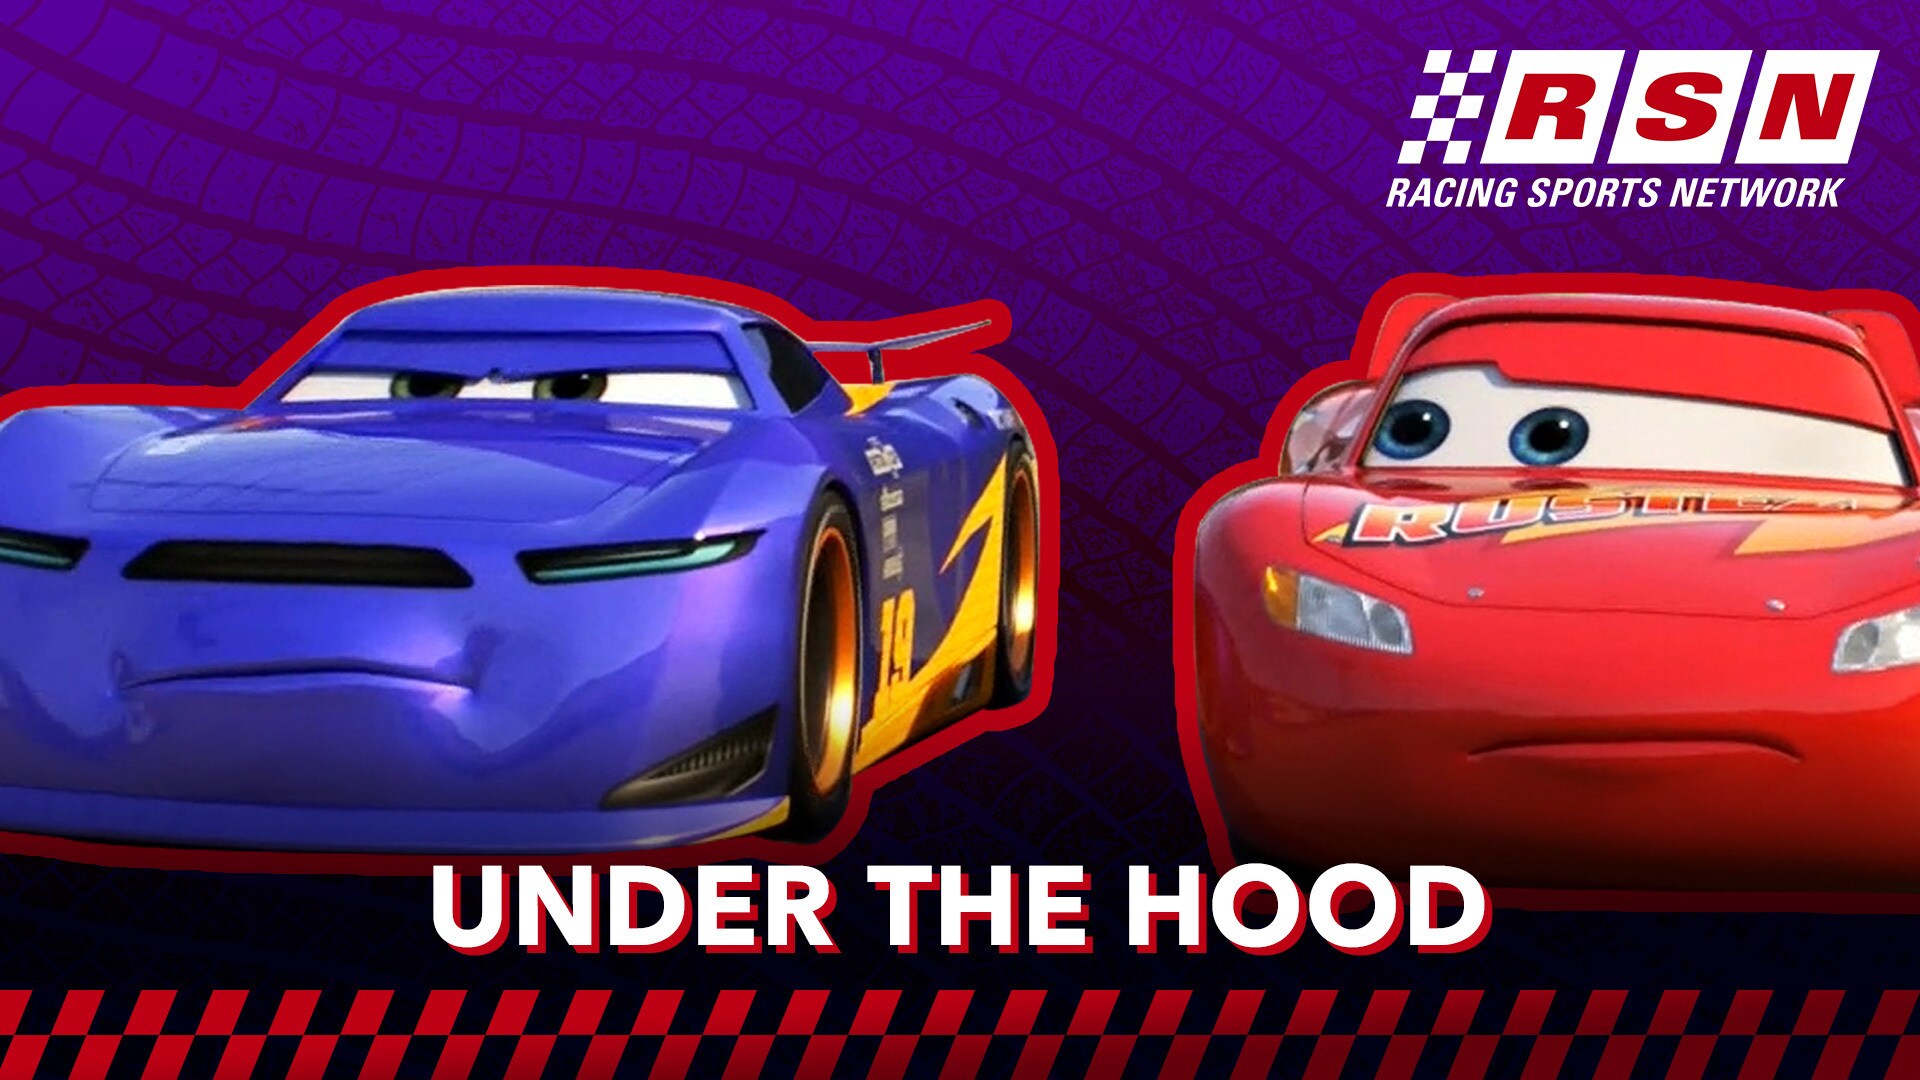 Under the Hood: Race and Chase Together